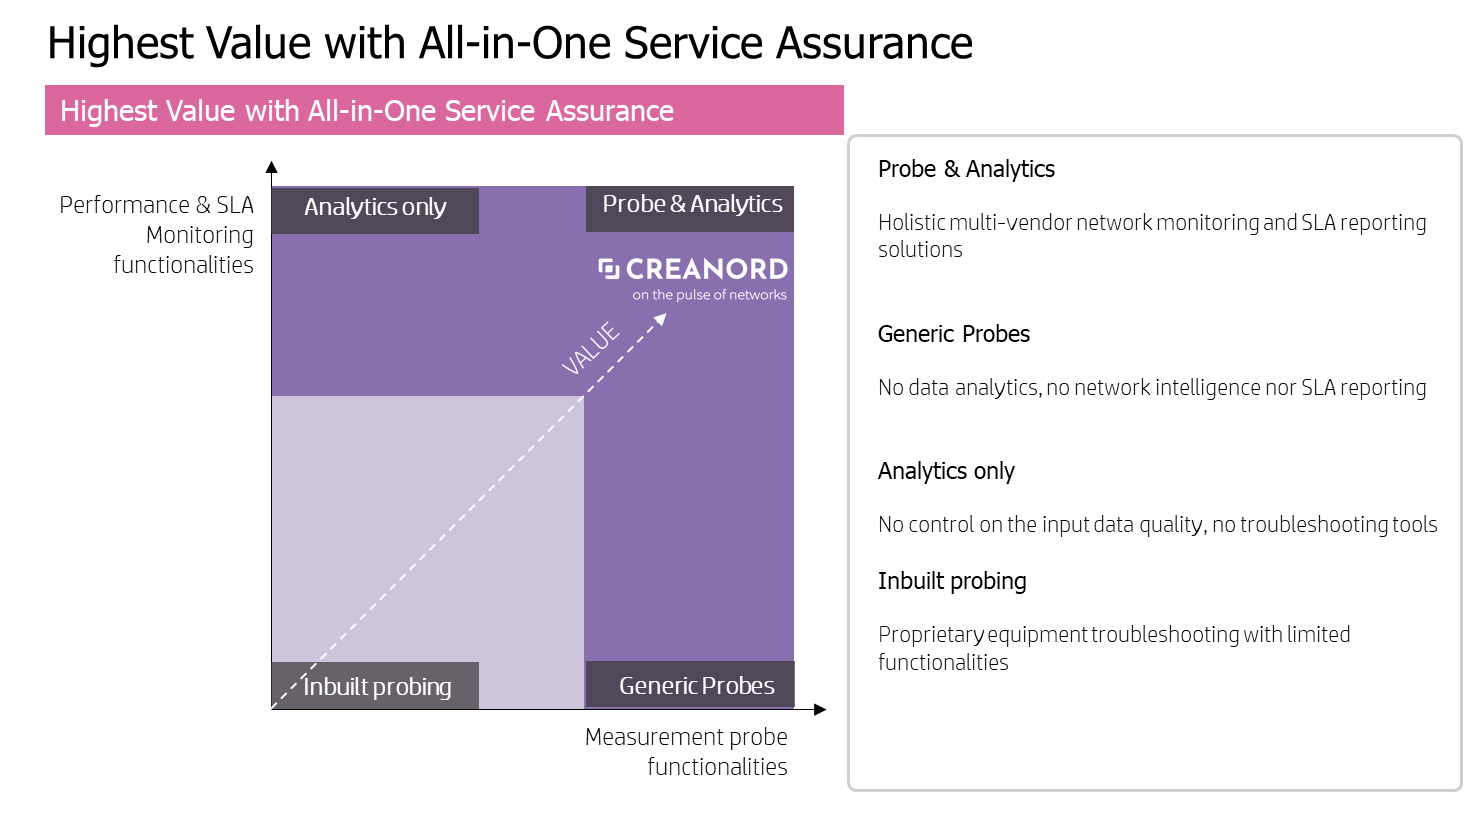 Highest Value with All-in-One Service Assurance